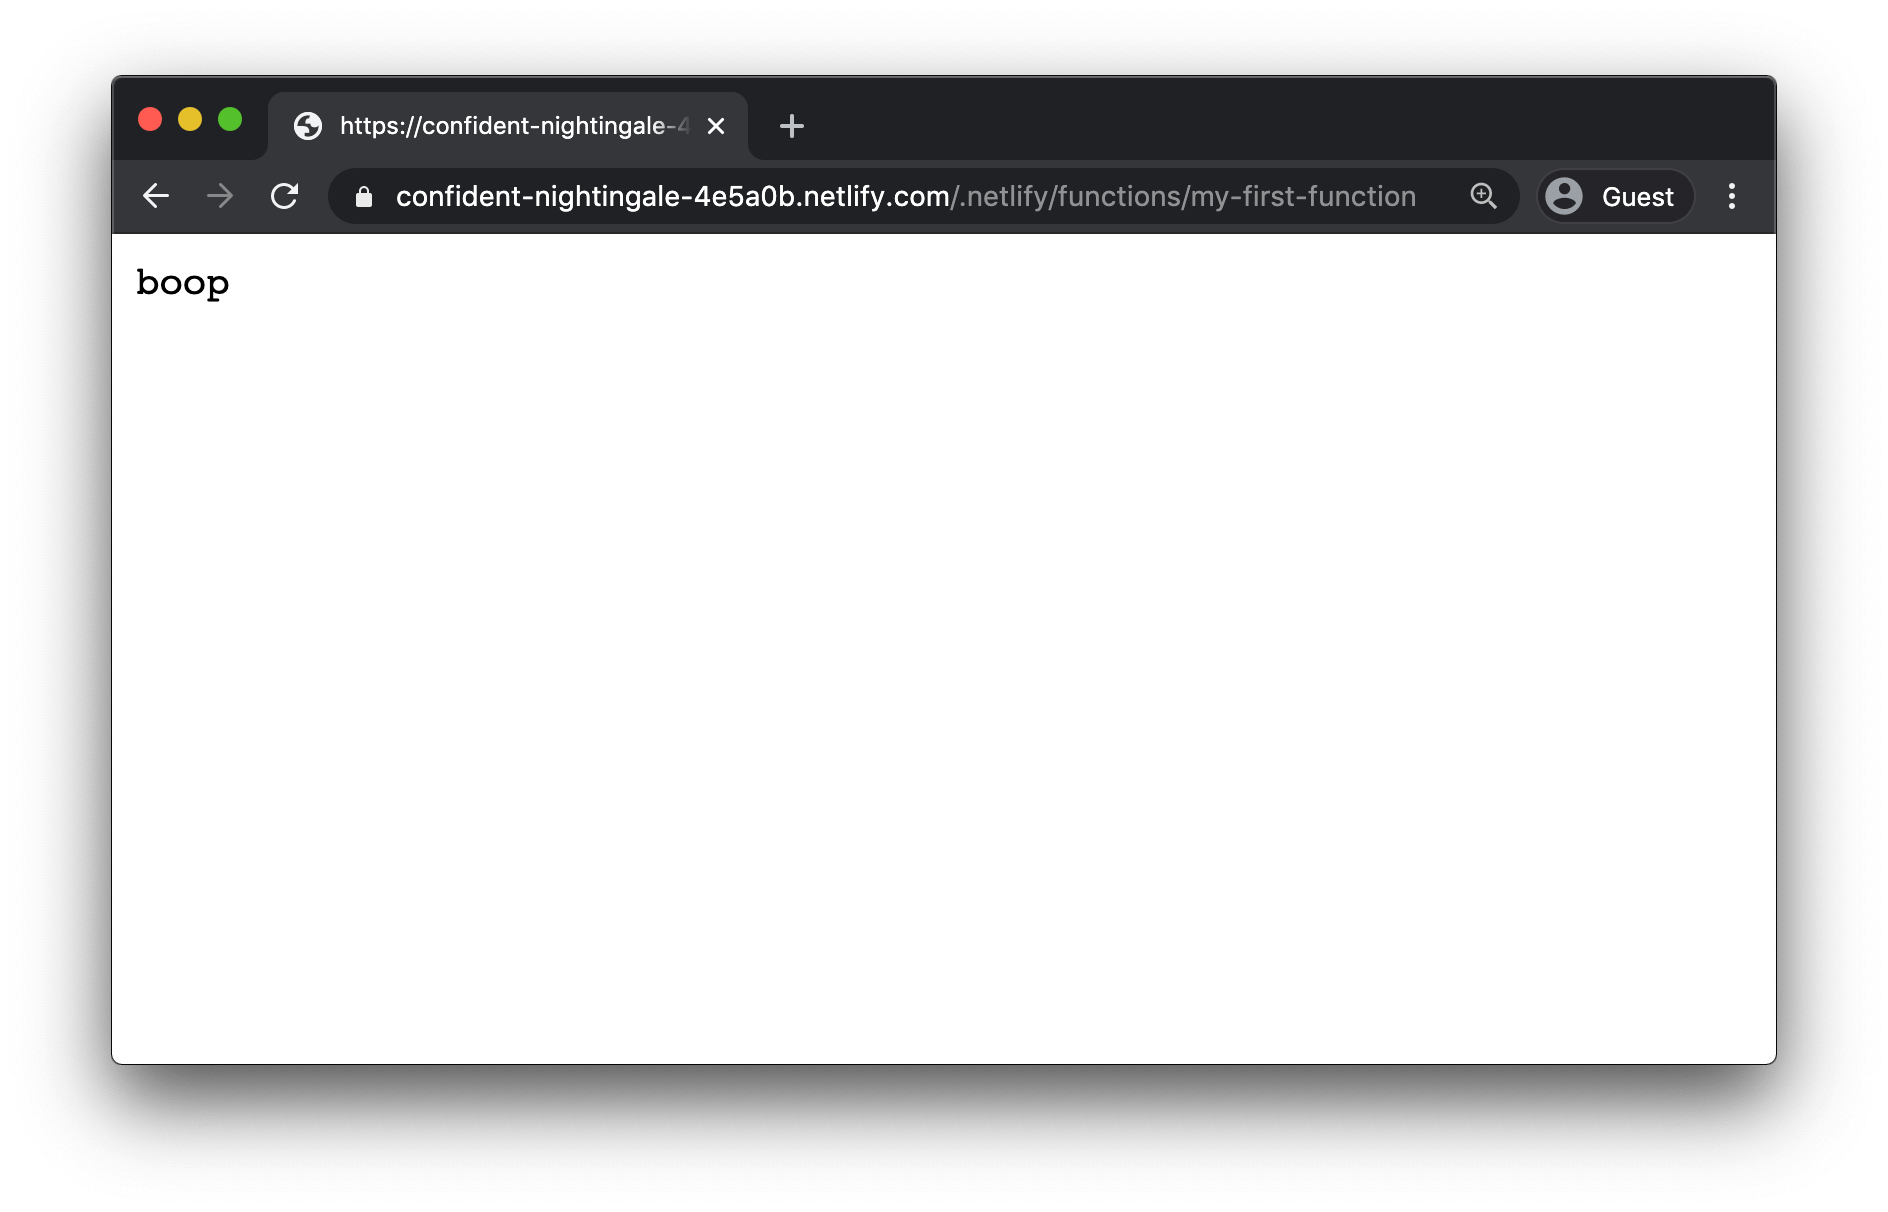 Browser showing the “boop” returned by the serverless function.